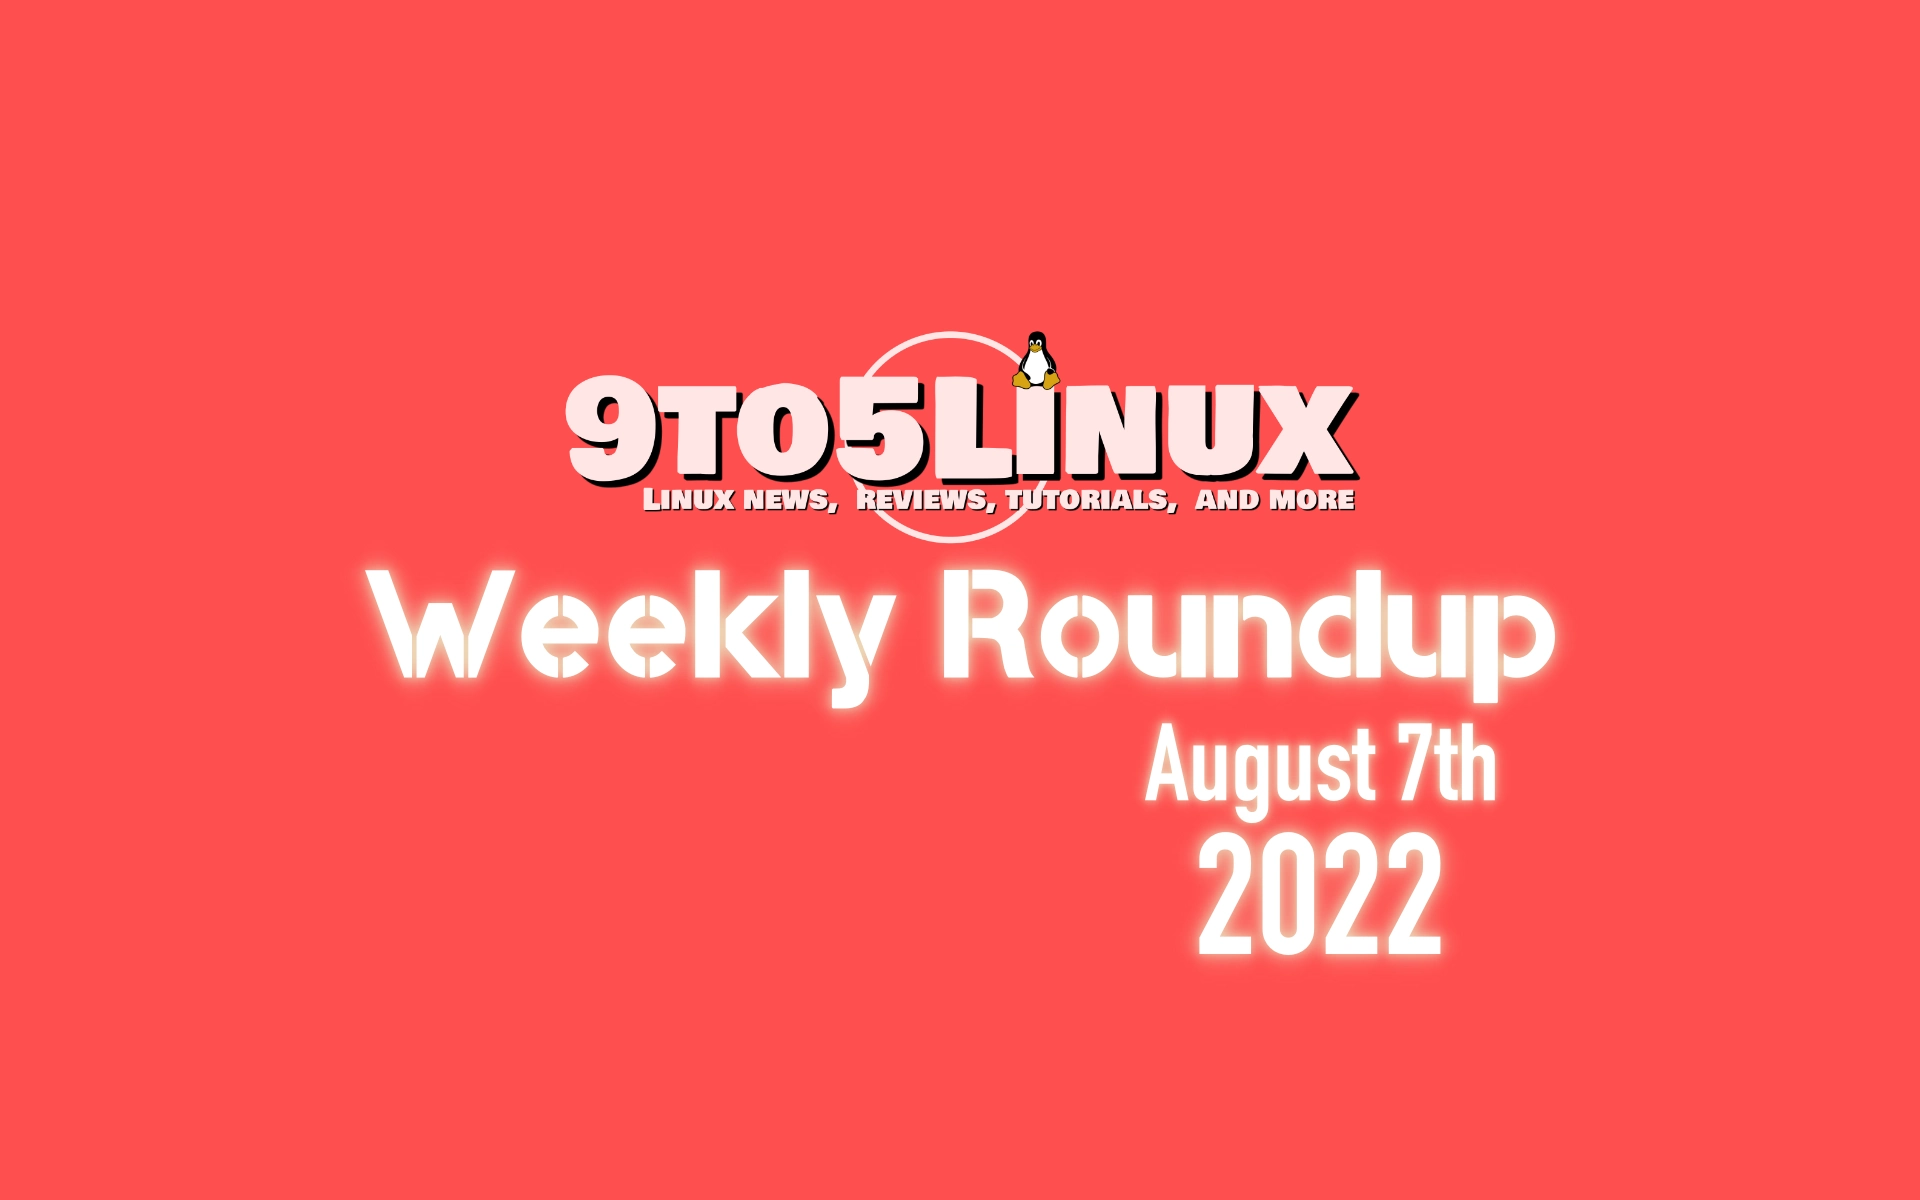 9to5Linux Weekly Roundup: August 7th, 2022